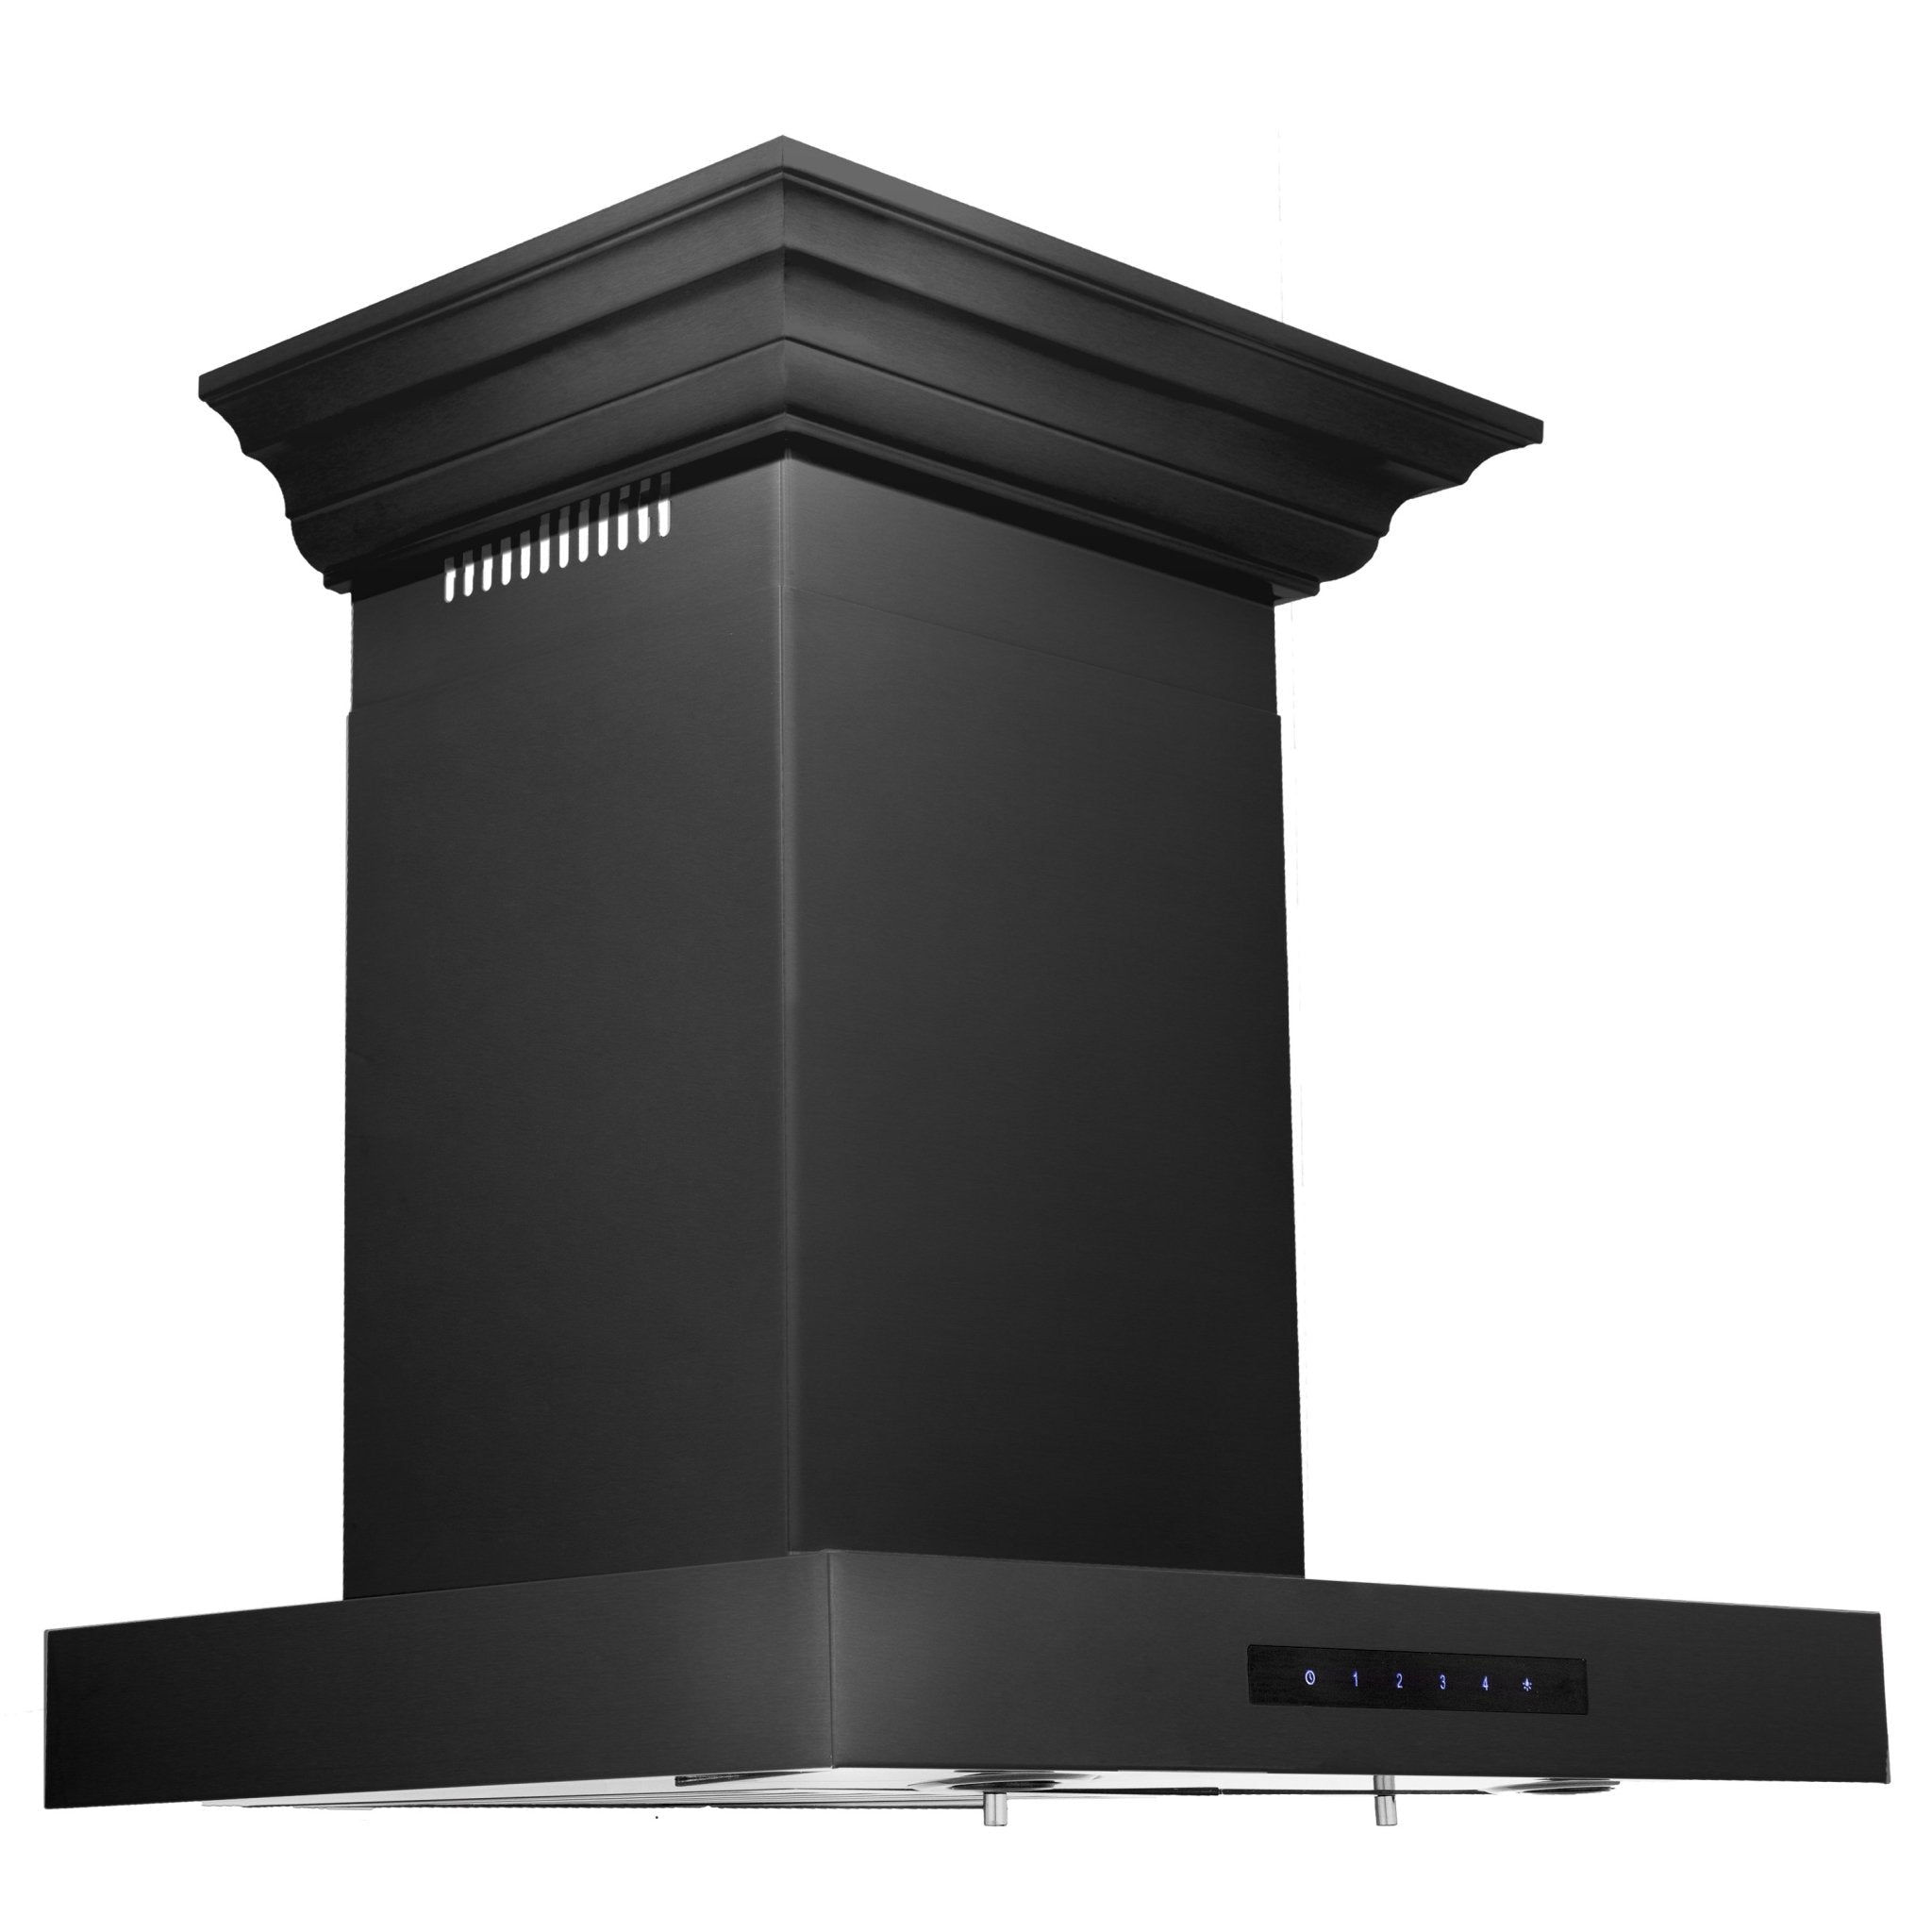 ZLINE 24" Convertible Vent Wall Mount Range Hood in Black Stainless Steel with Crown Molding (BSKENCRN-24)